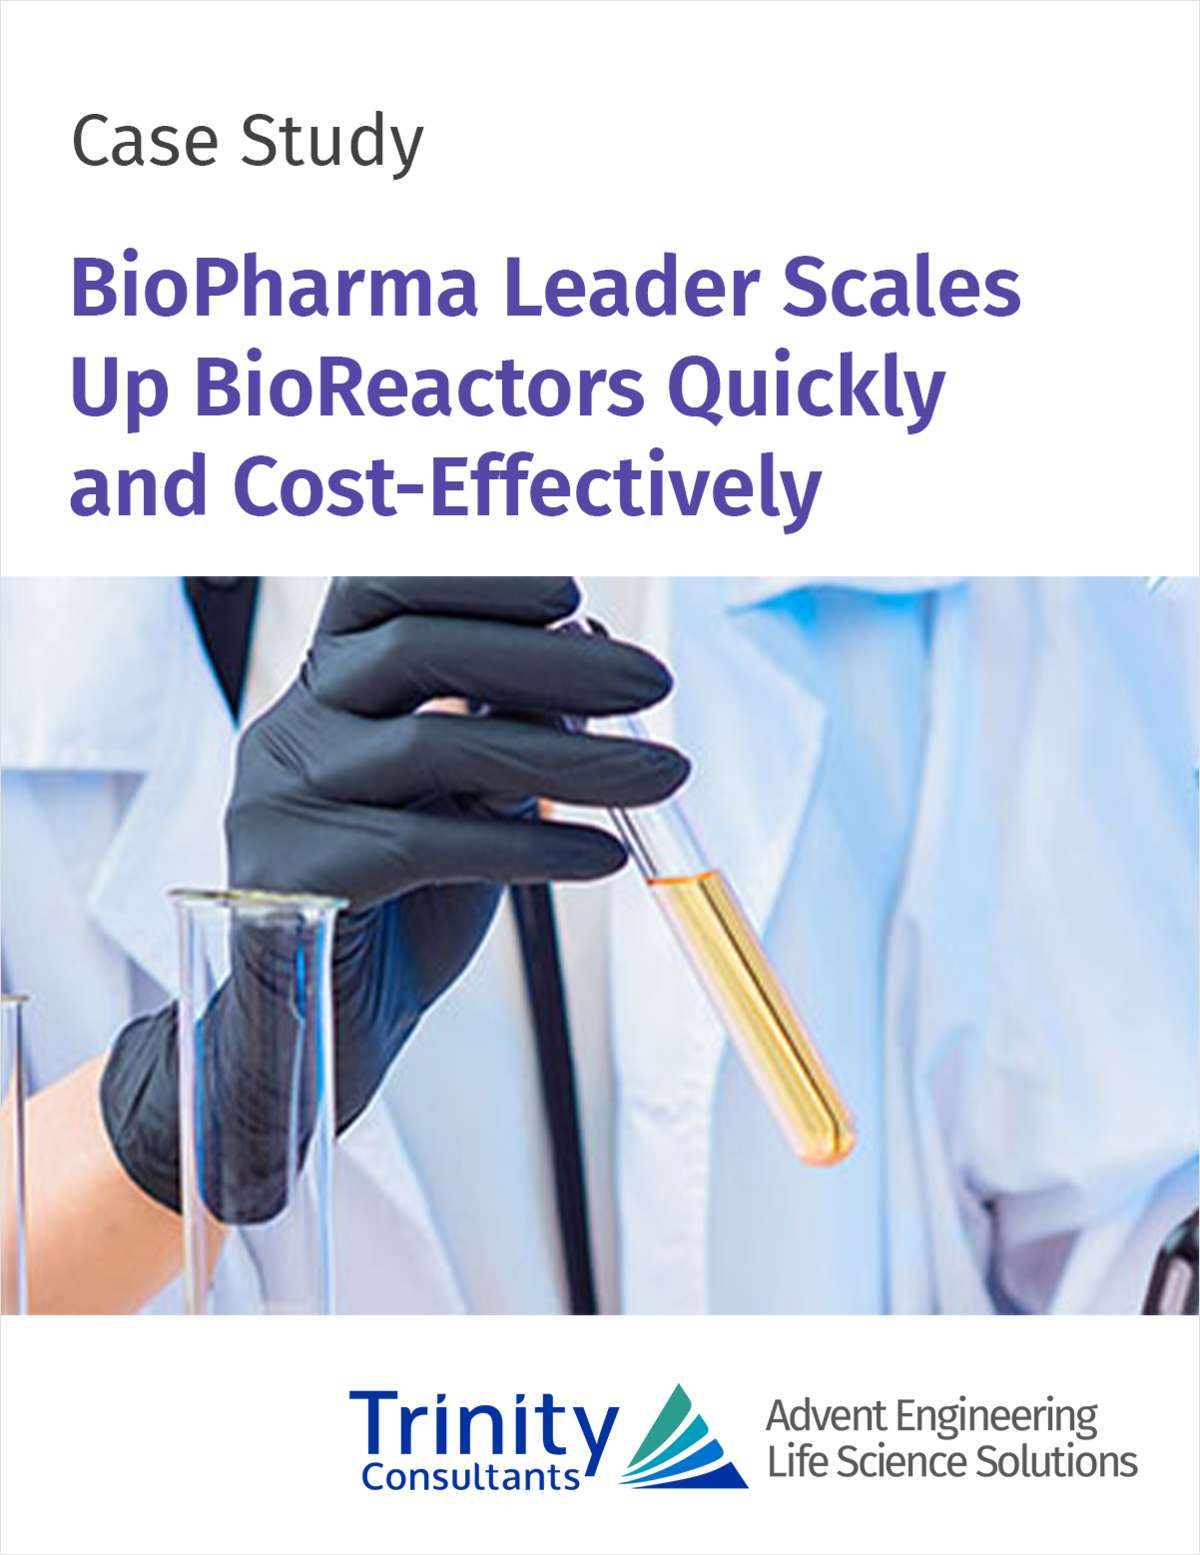 Transform Bioreactor Scale-Up: Cost-Effective, Rapid Solutions for BioPharmaceutical Leaders